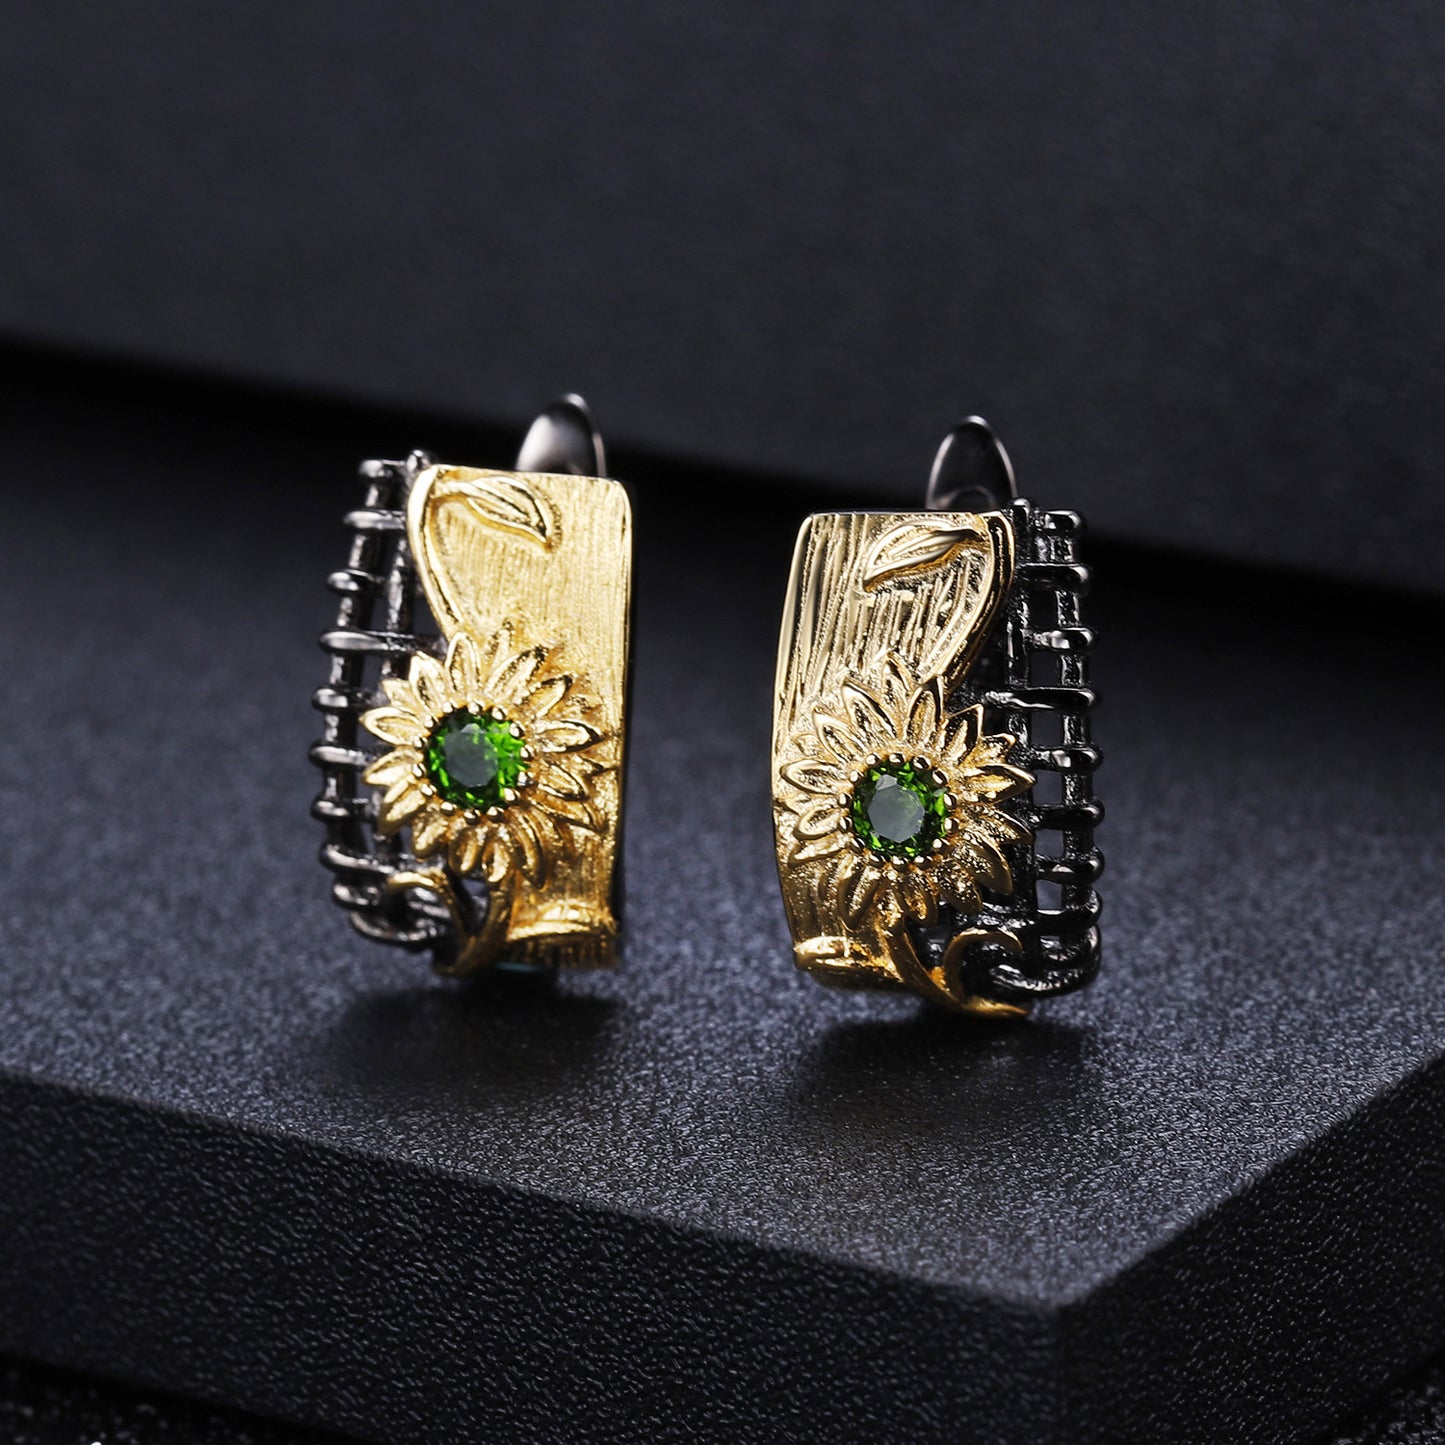 Italian Craft Vintage Style Inlaid Natural Colourful Gemstone Floral Design Silver Studs Earrings for Women